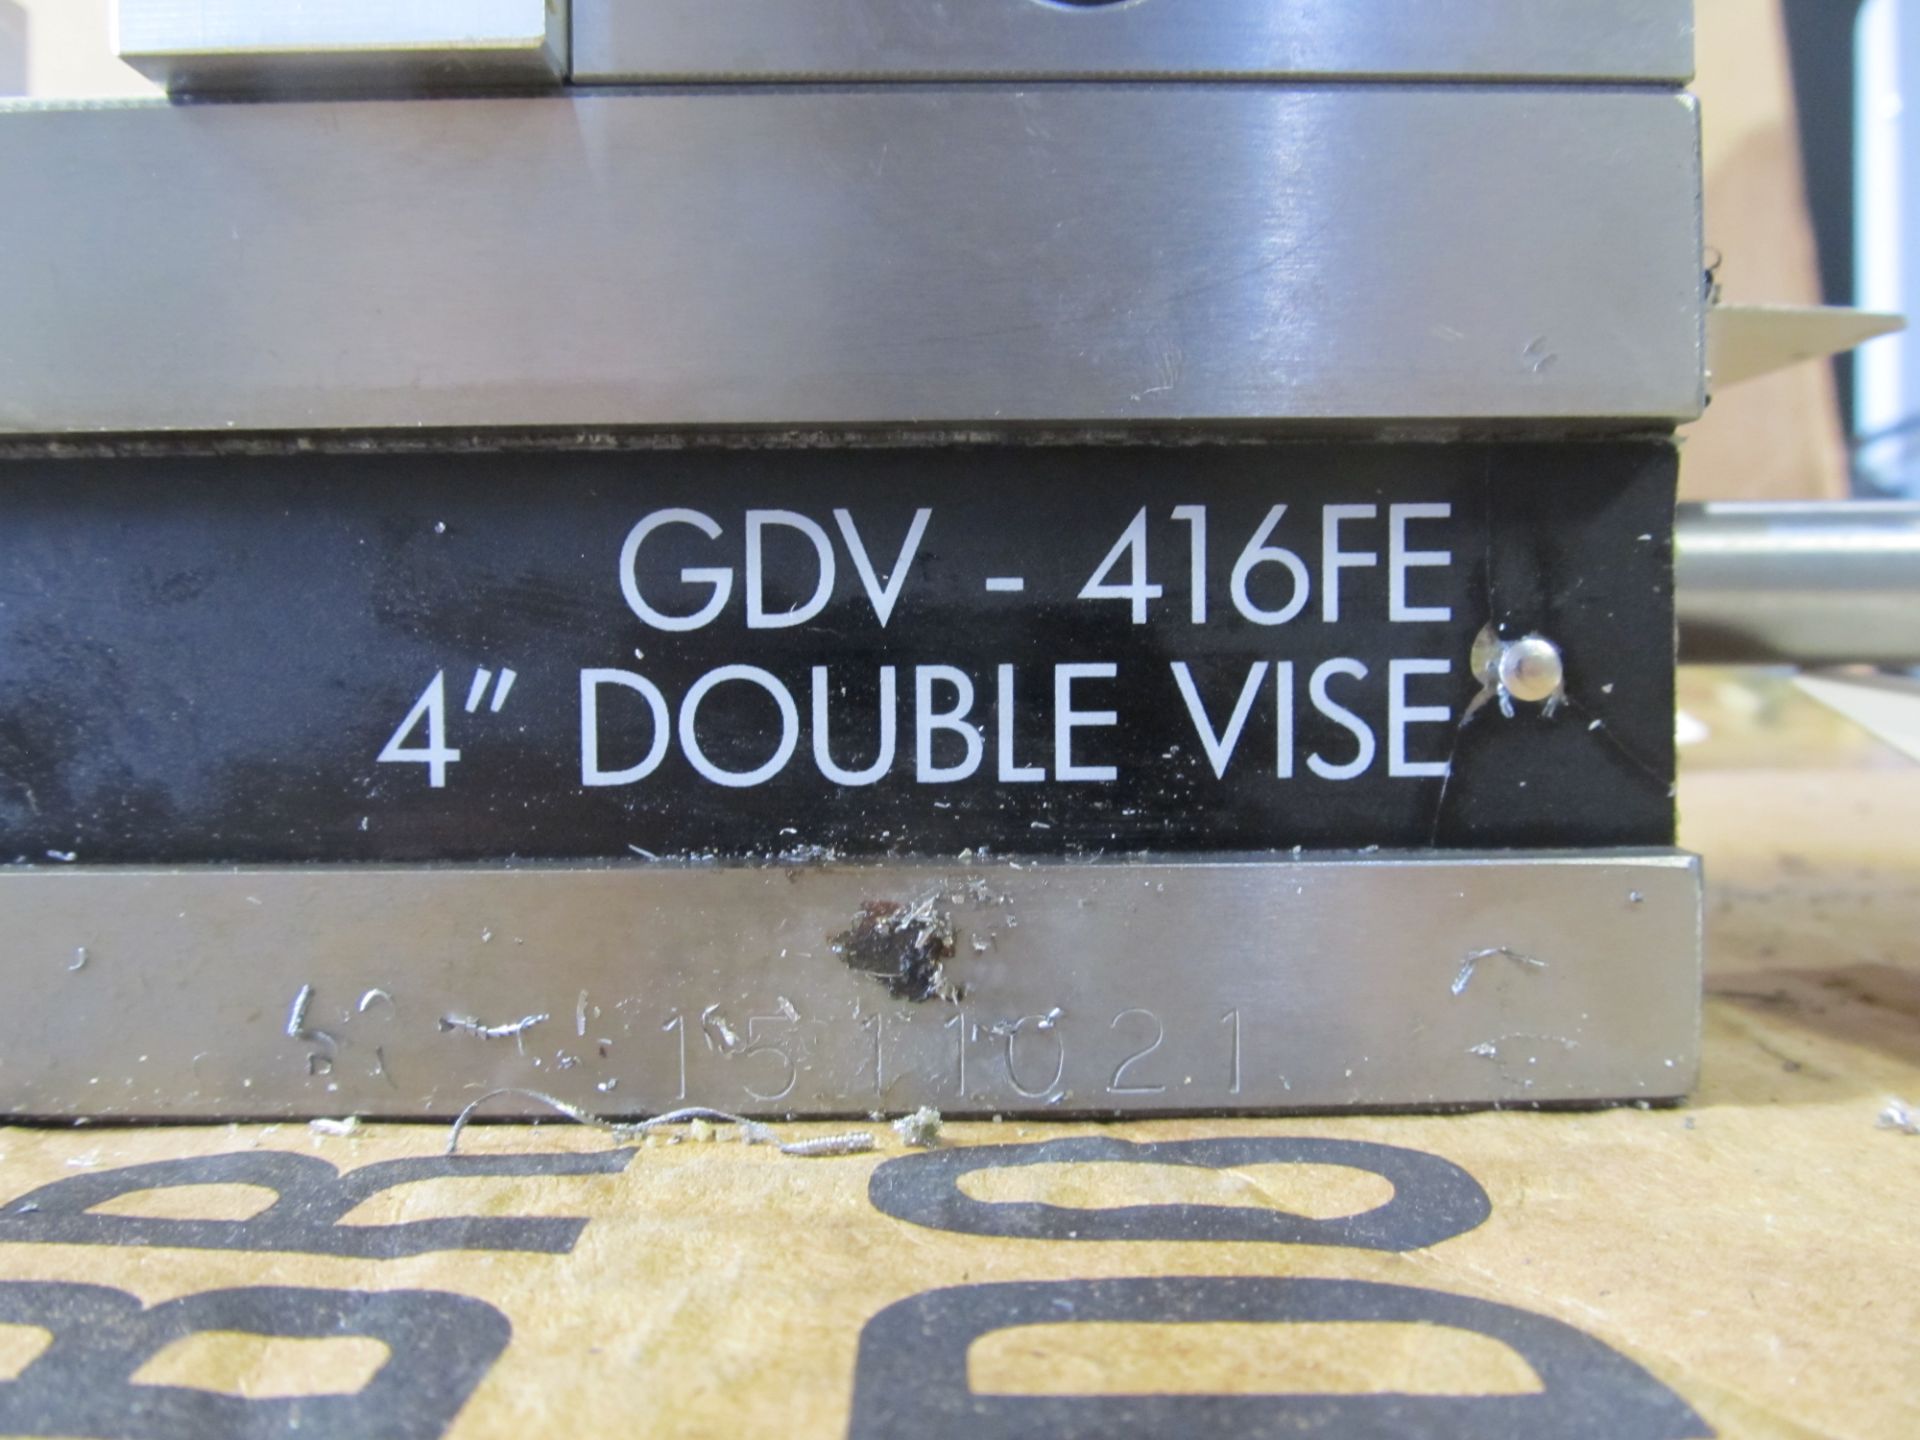 Lot of 2 - Glacern Machine Tools GDV-416FE 4" Double Vises - Image 2 of 5